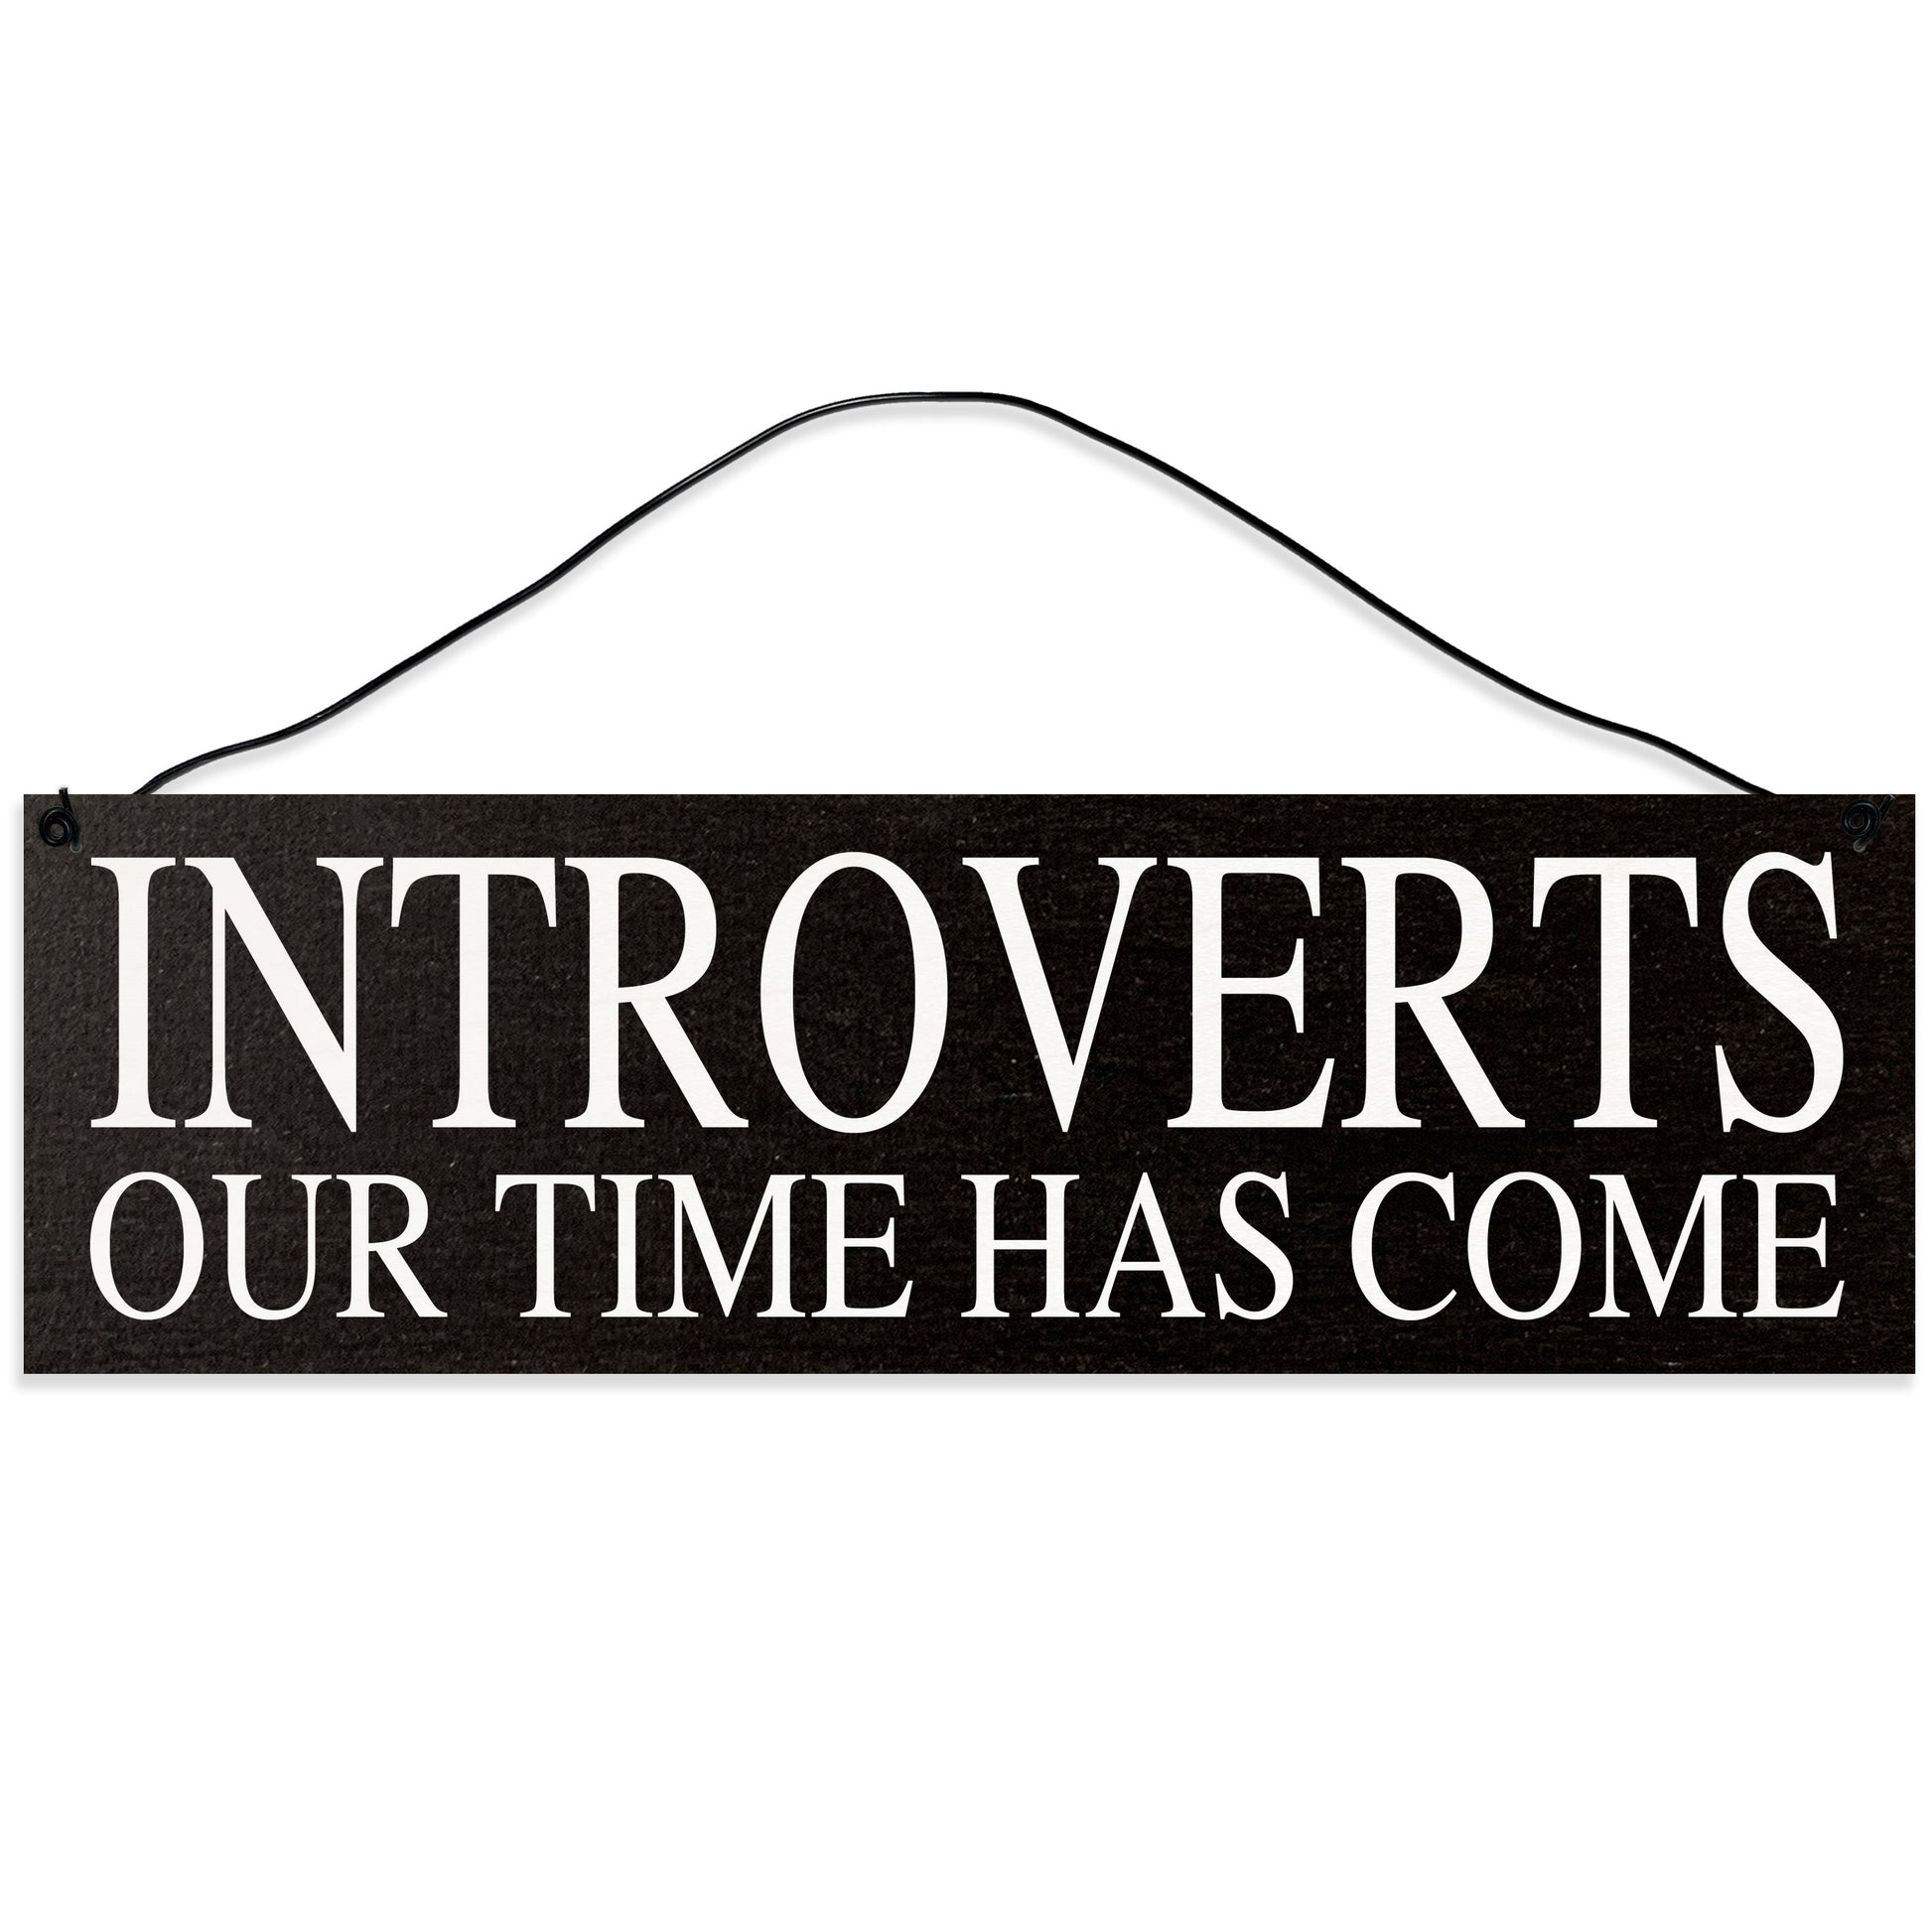 Sawyer's Mill - Introverts. Our Time Has Come. Wood Sign for Home or Office. Measures 3x10 inches.